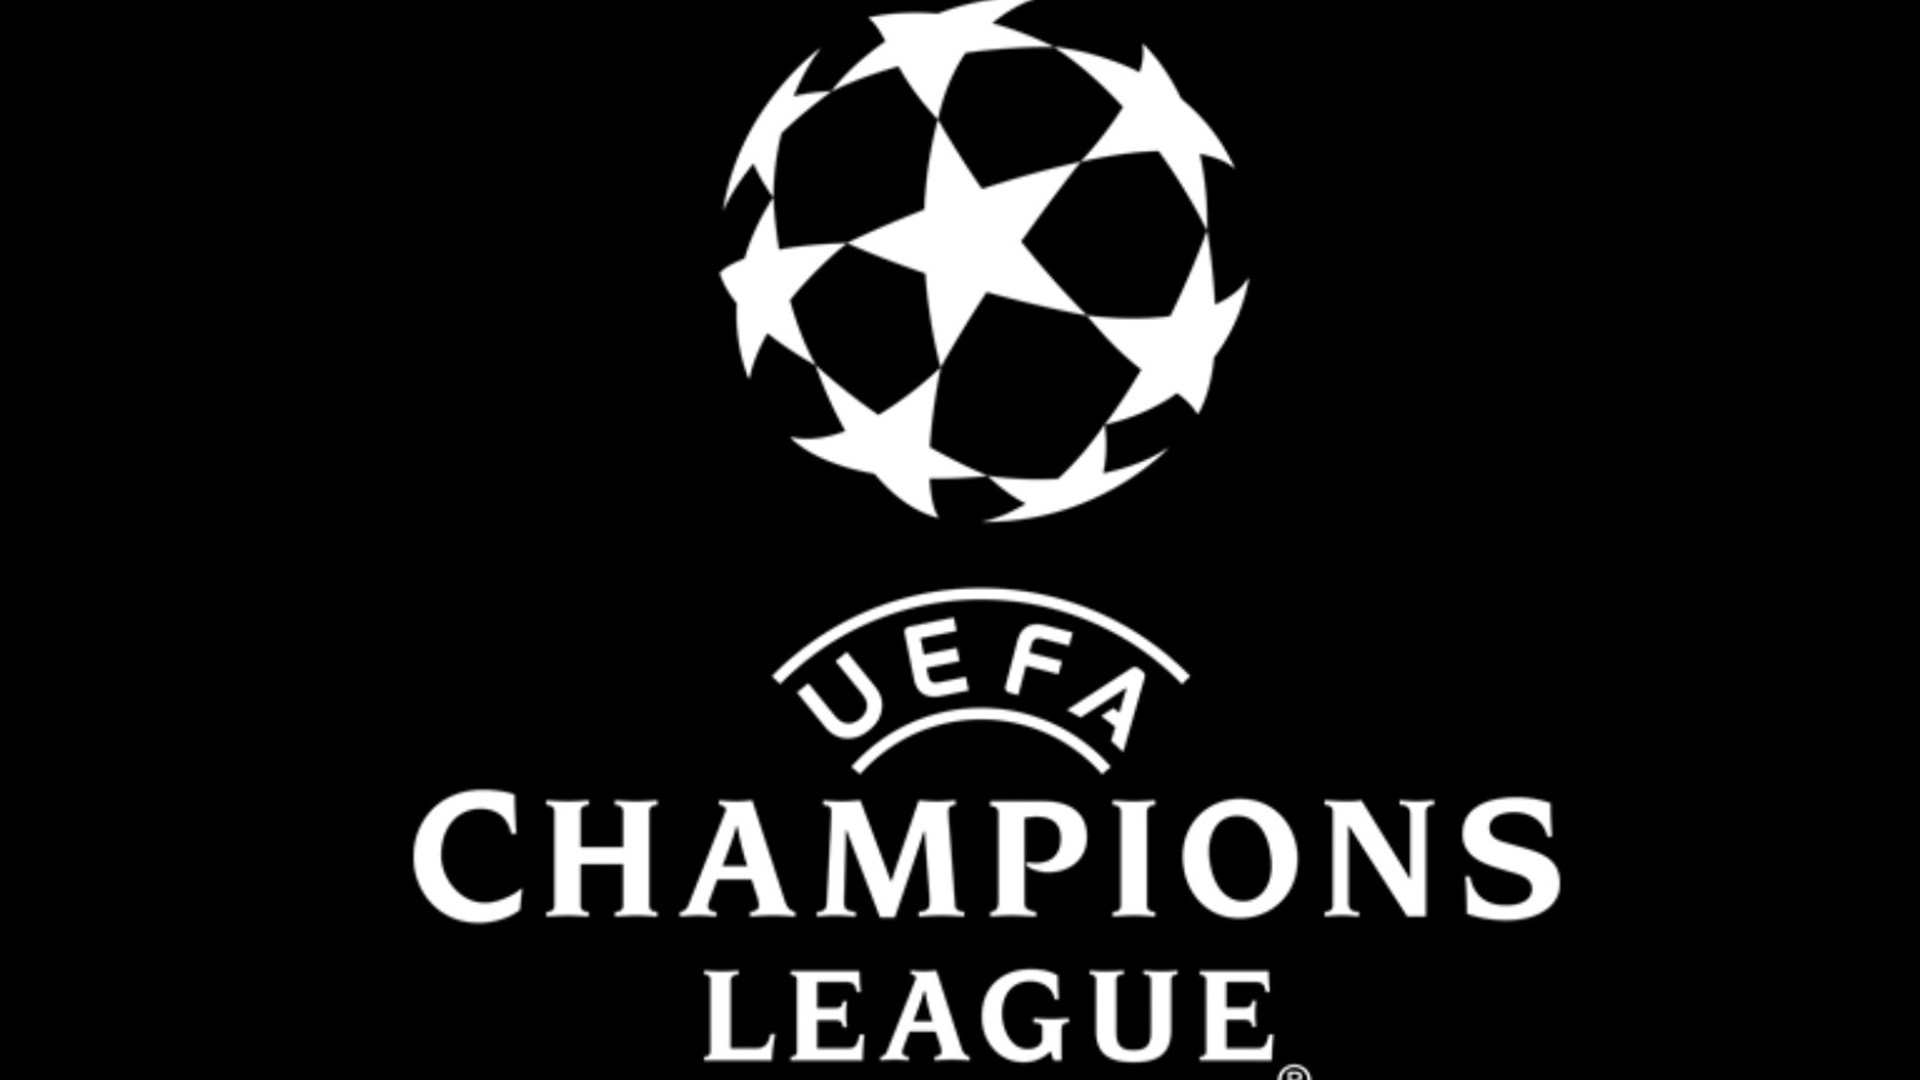 UEFA Champions Schedule: Watch Live Matches On Paramount+